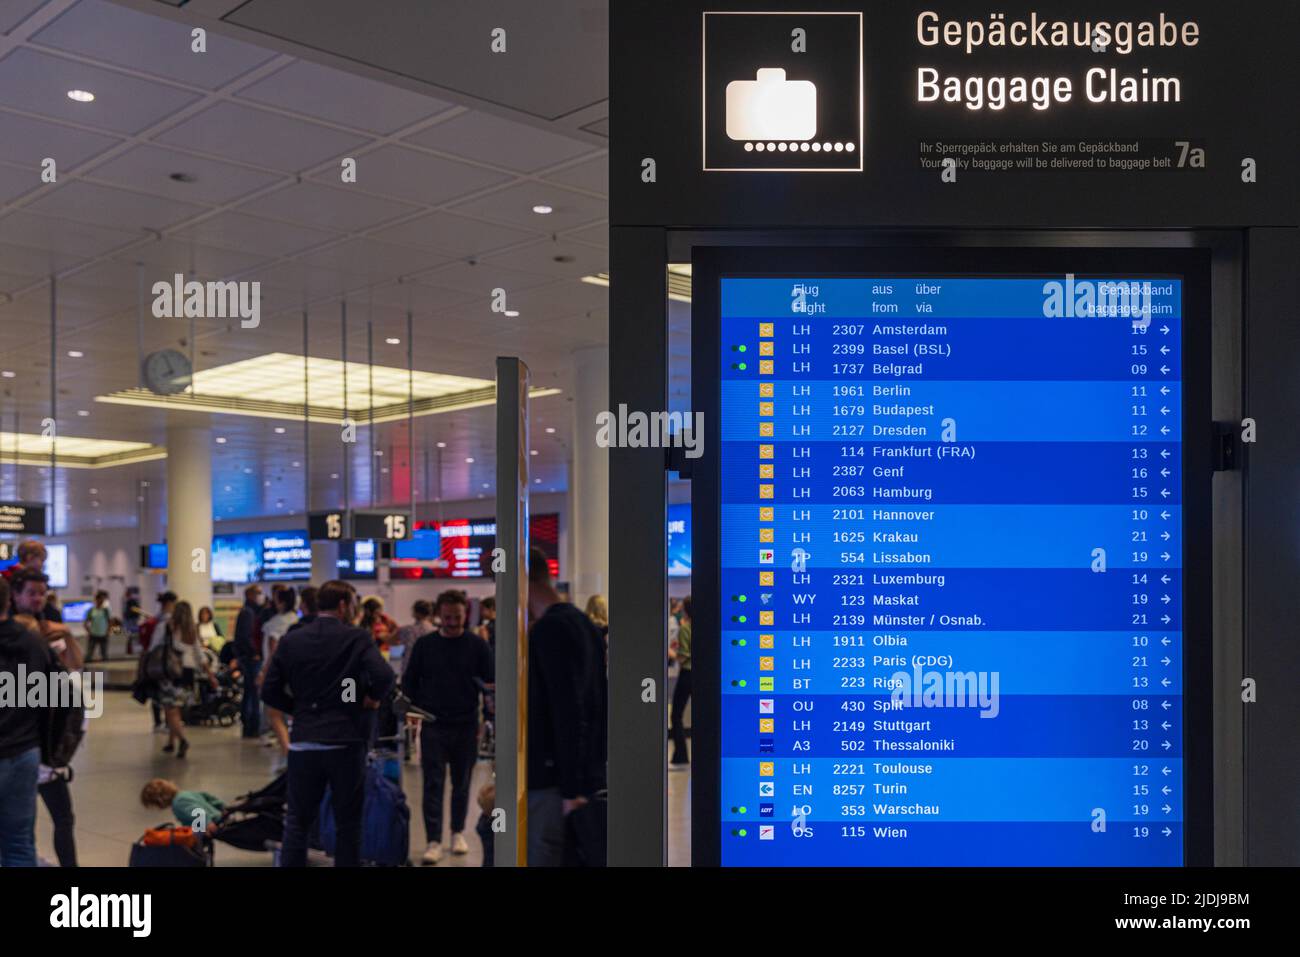 MUNICH, GERMANY - JUNE 20, 2022: Munich airport, luggage waiting area on June 20, 2022. Lack of personel causes many delays at the airports in Europe. Stock Photo